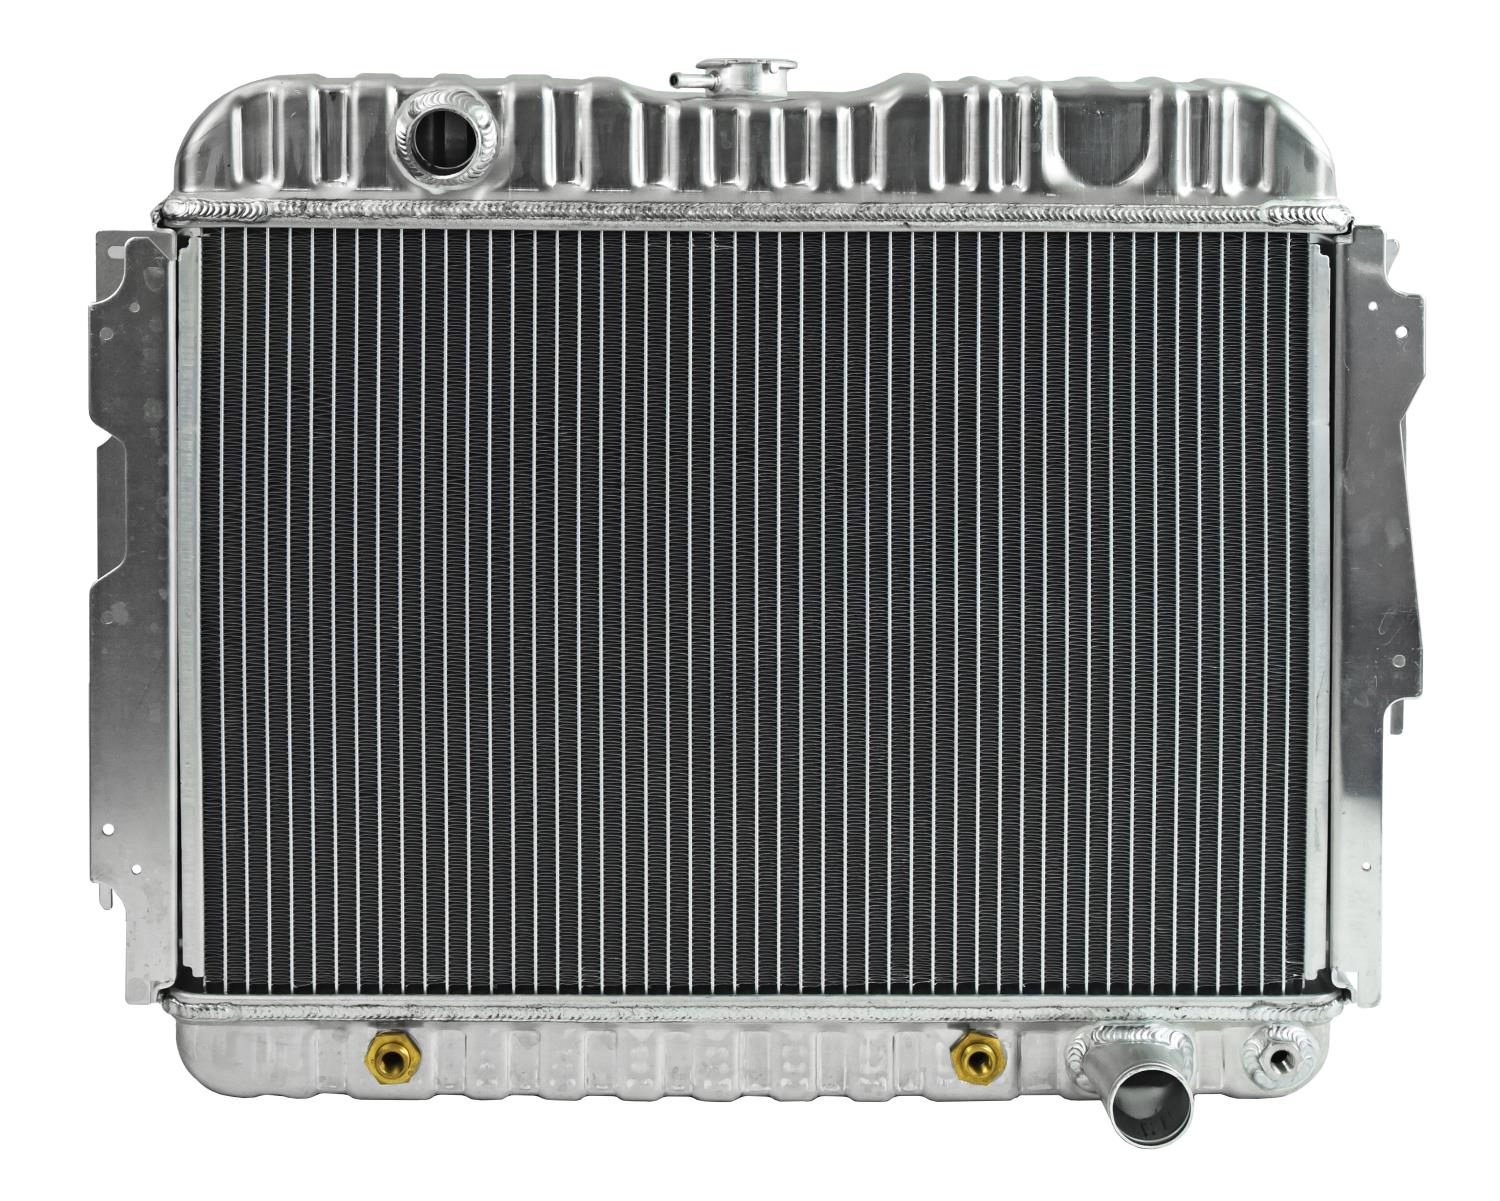 Reproduction Aluminum Radiator for Select 1970-1976 Mopar B & E Bodies With Small Block